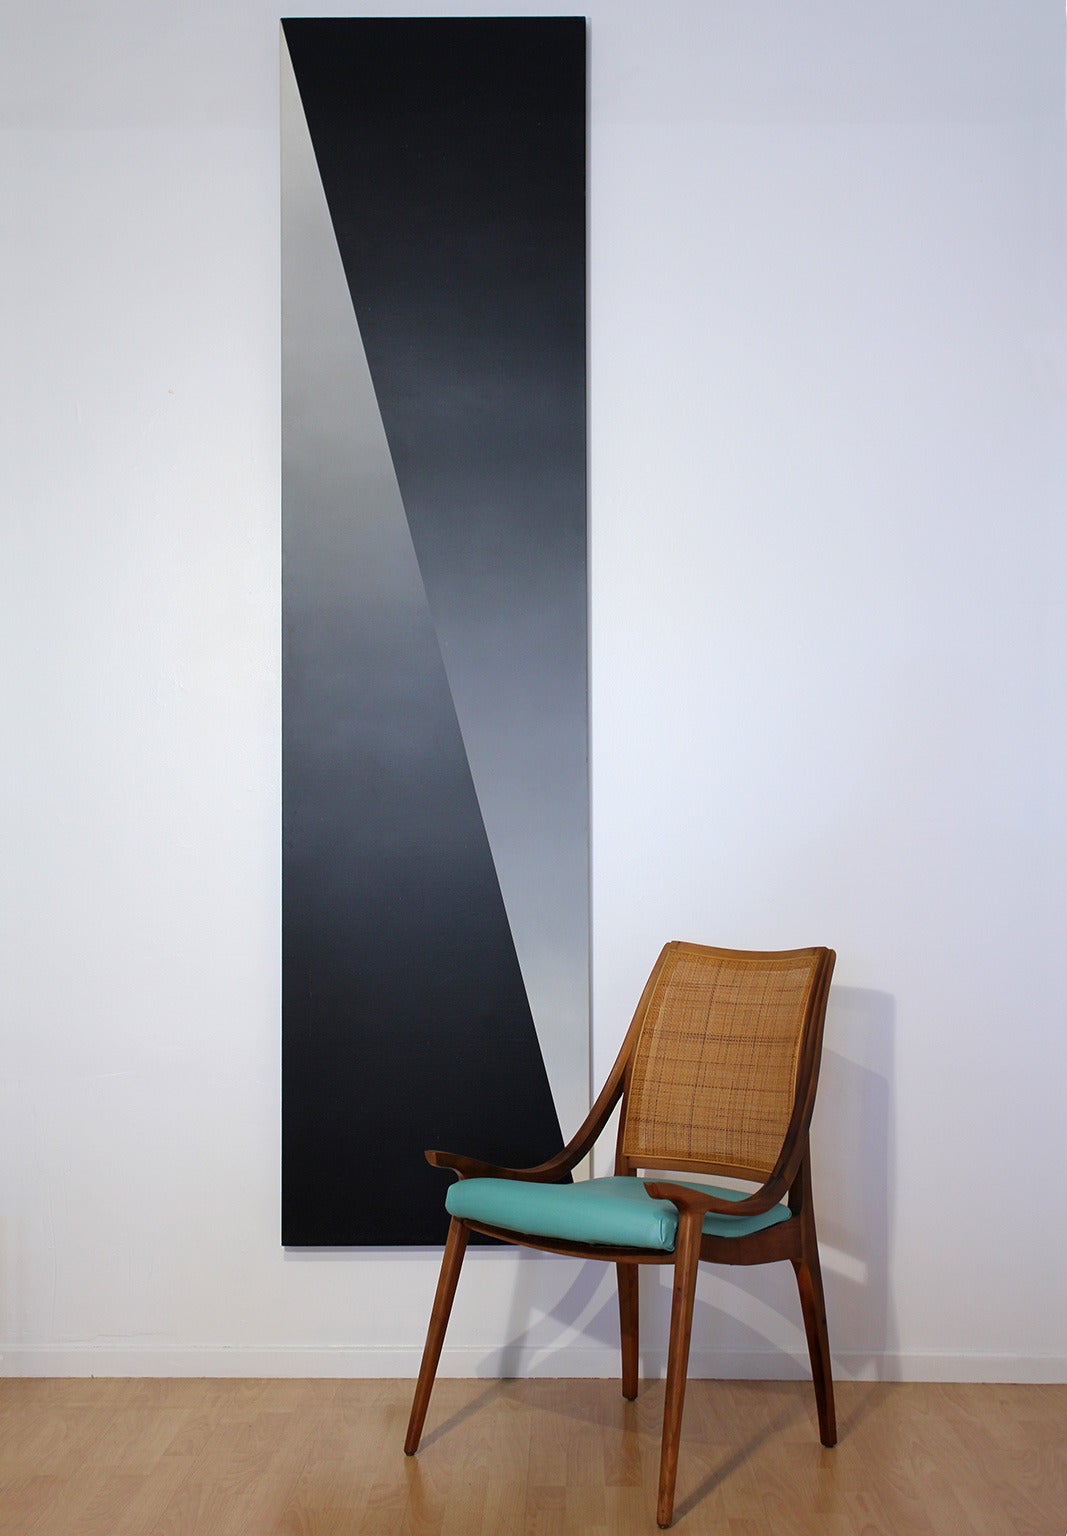 Tall vertical Minimalist hard edge abstraction by New York artist Don Lewallen titled 